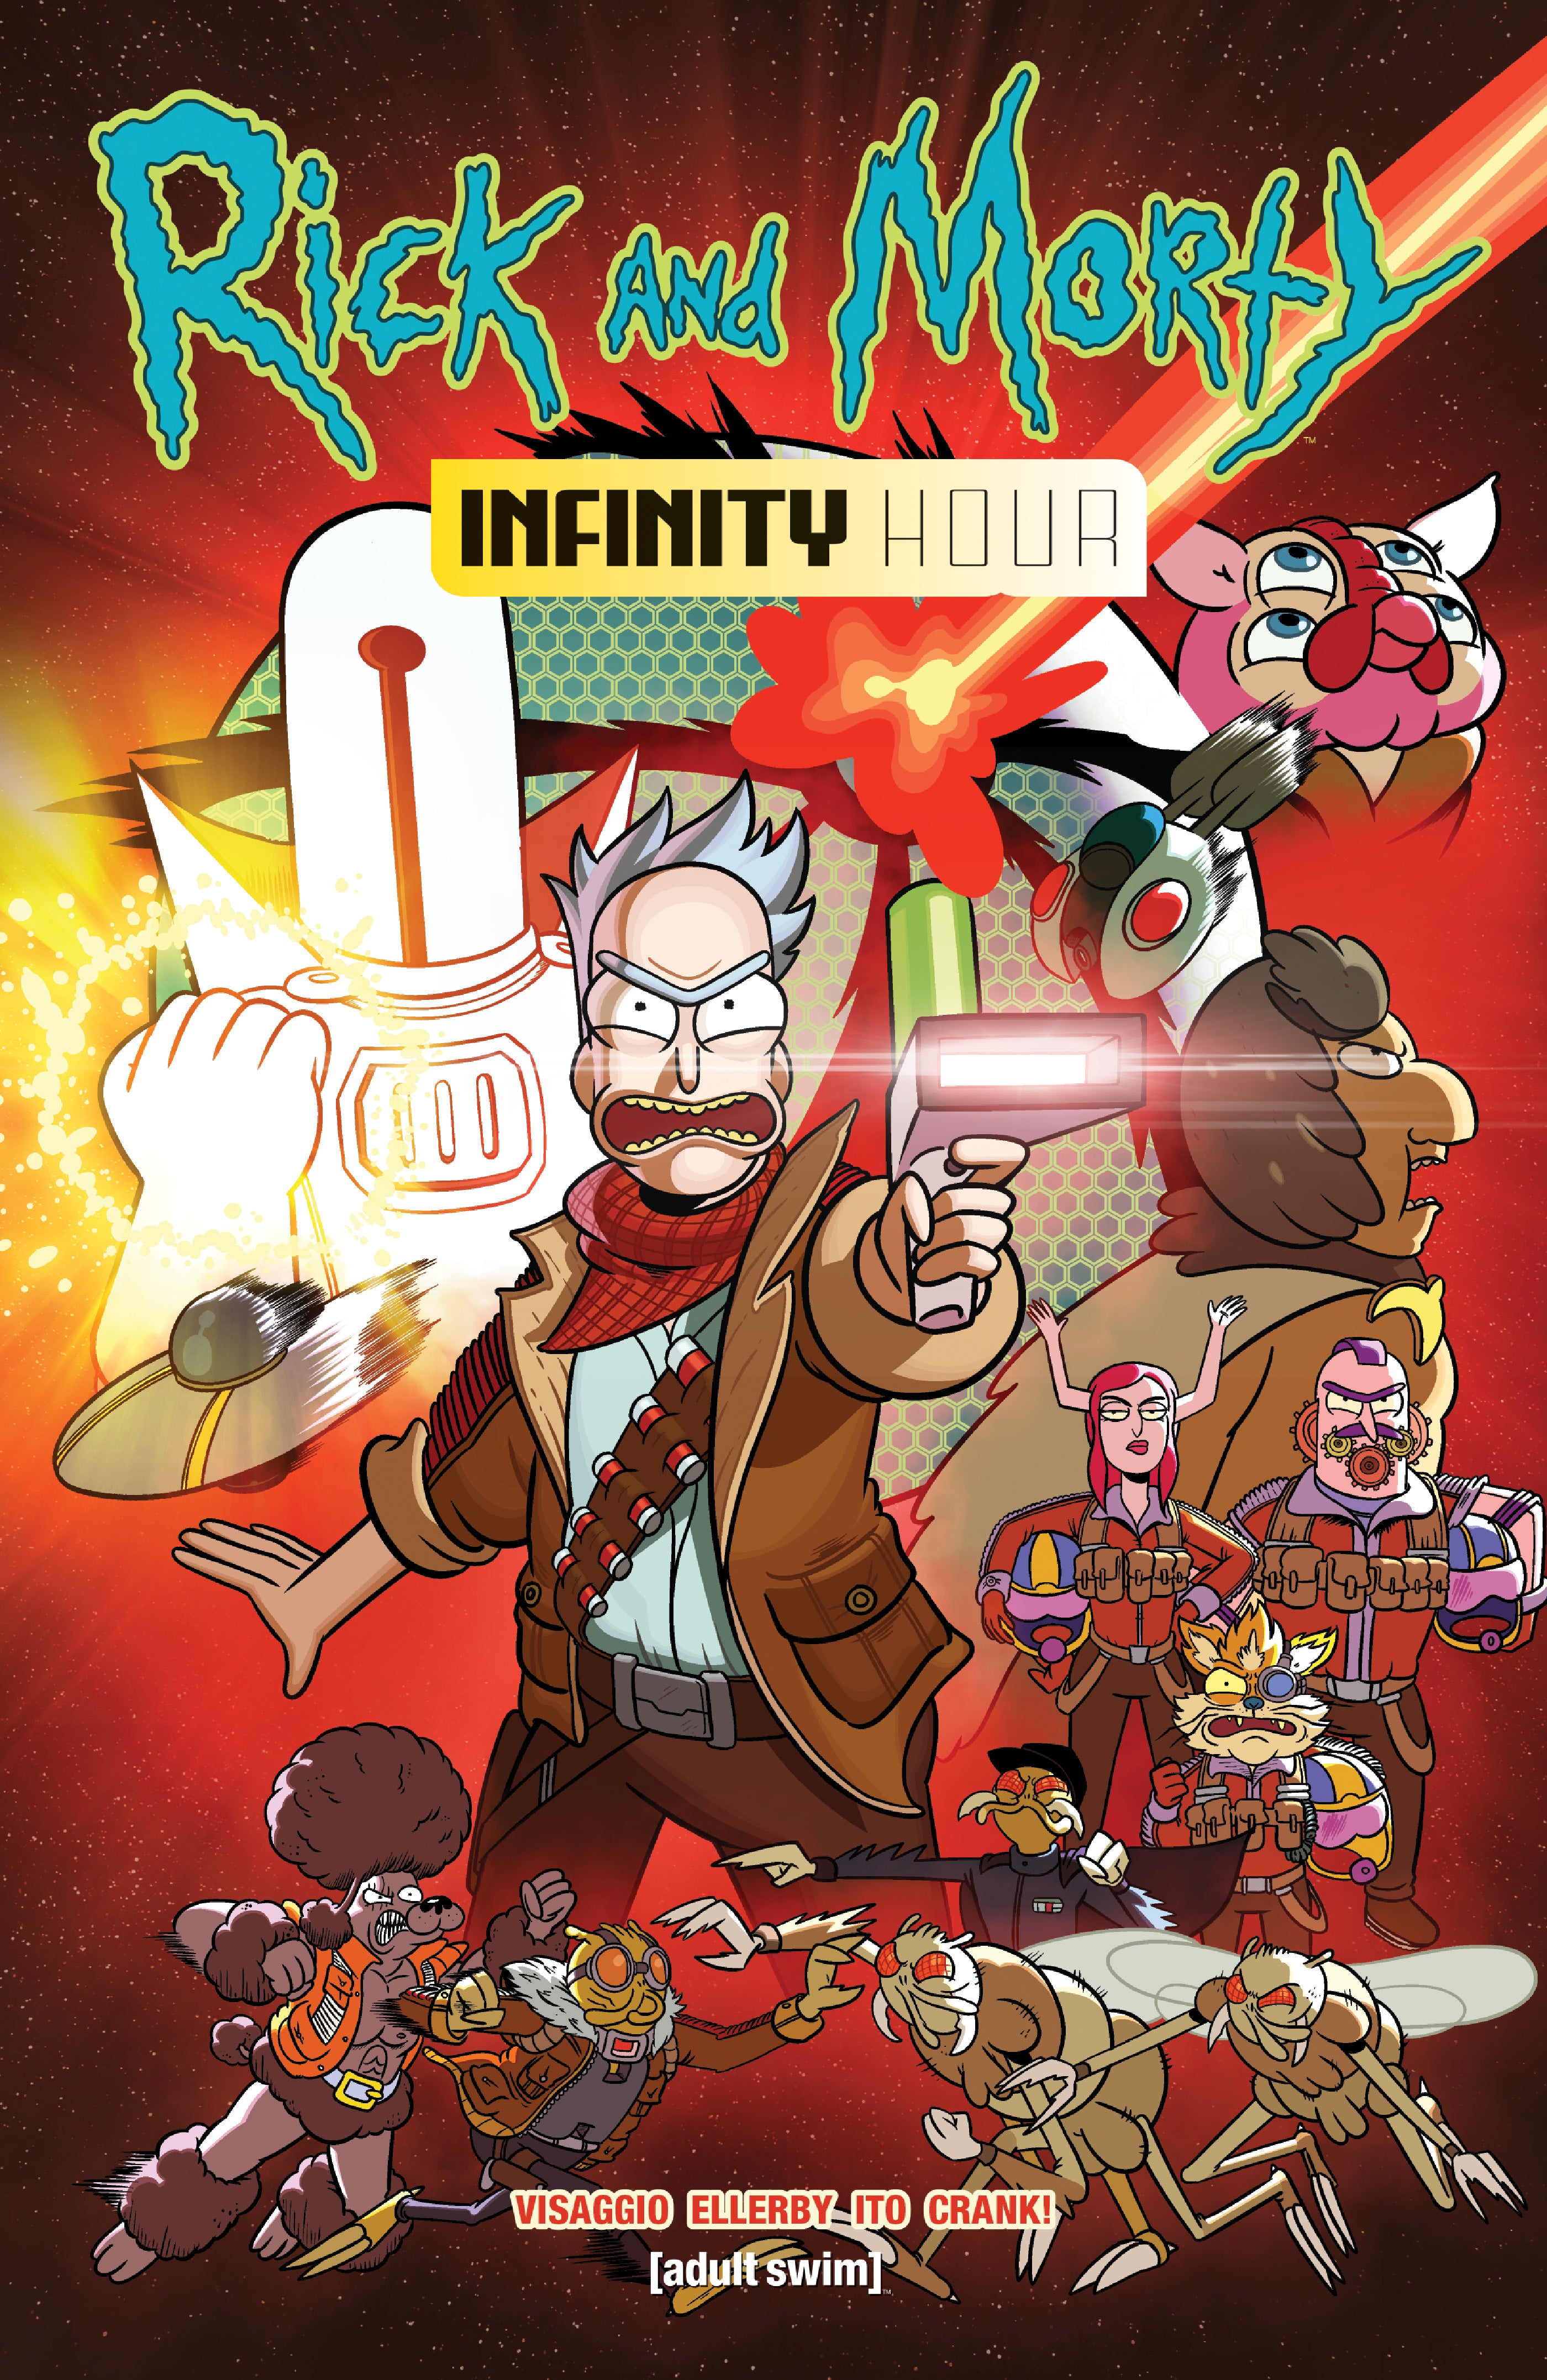 RICK AND MORTY TRADE PAPERBACK INFINITY HOUR